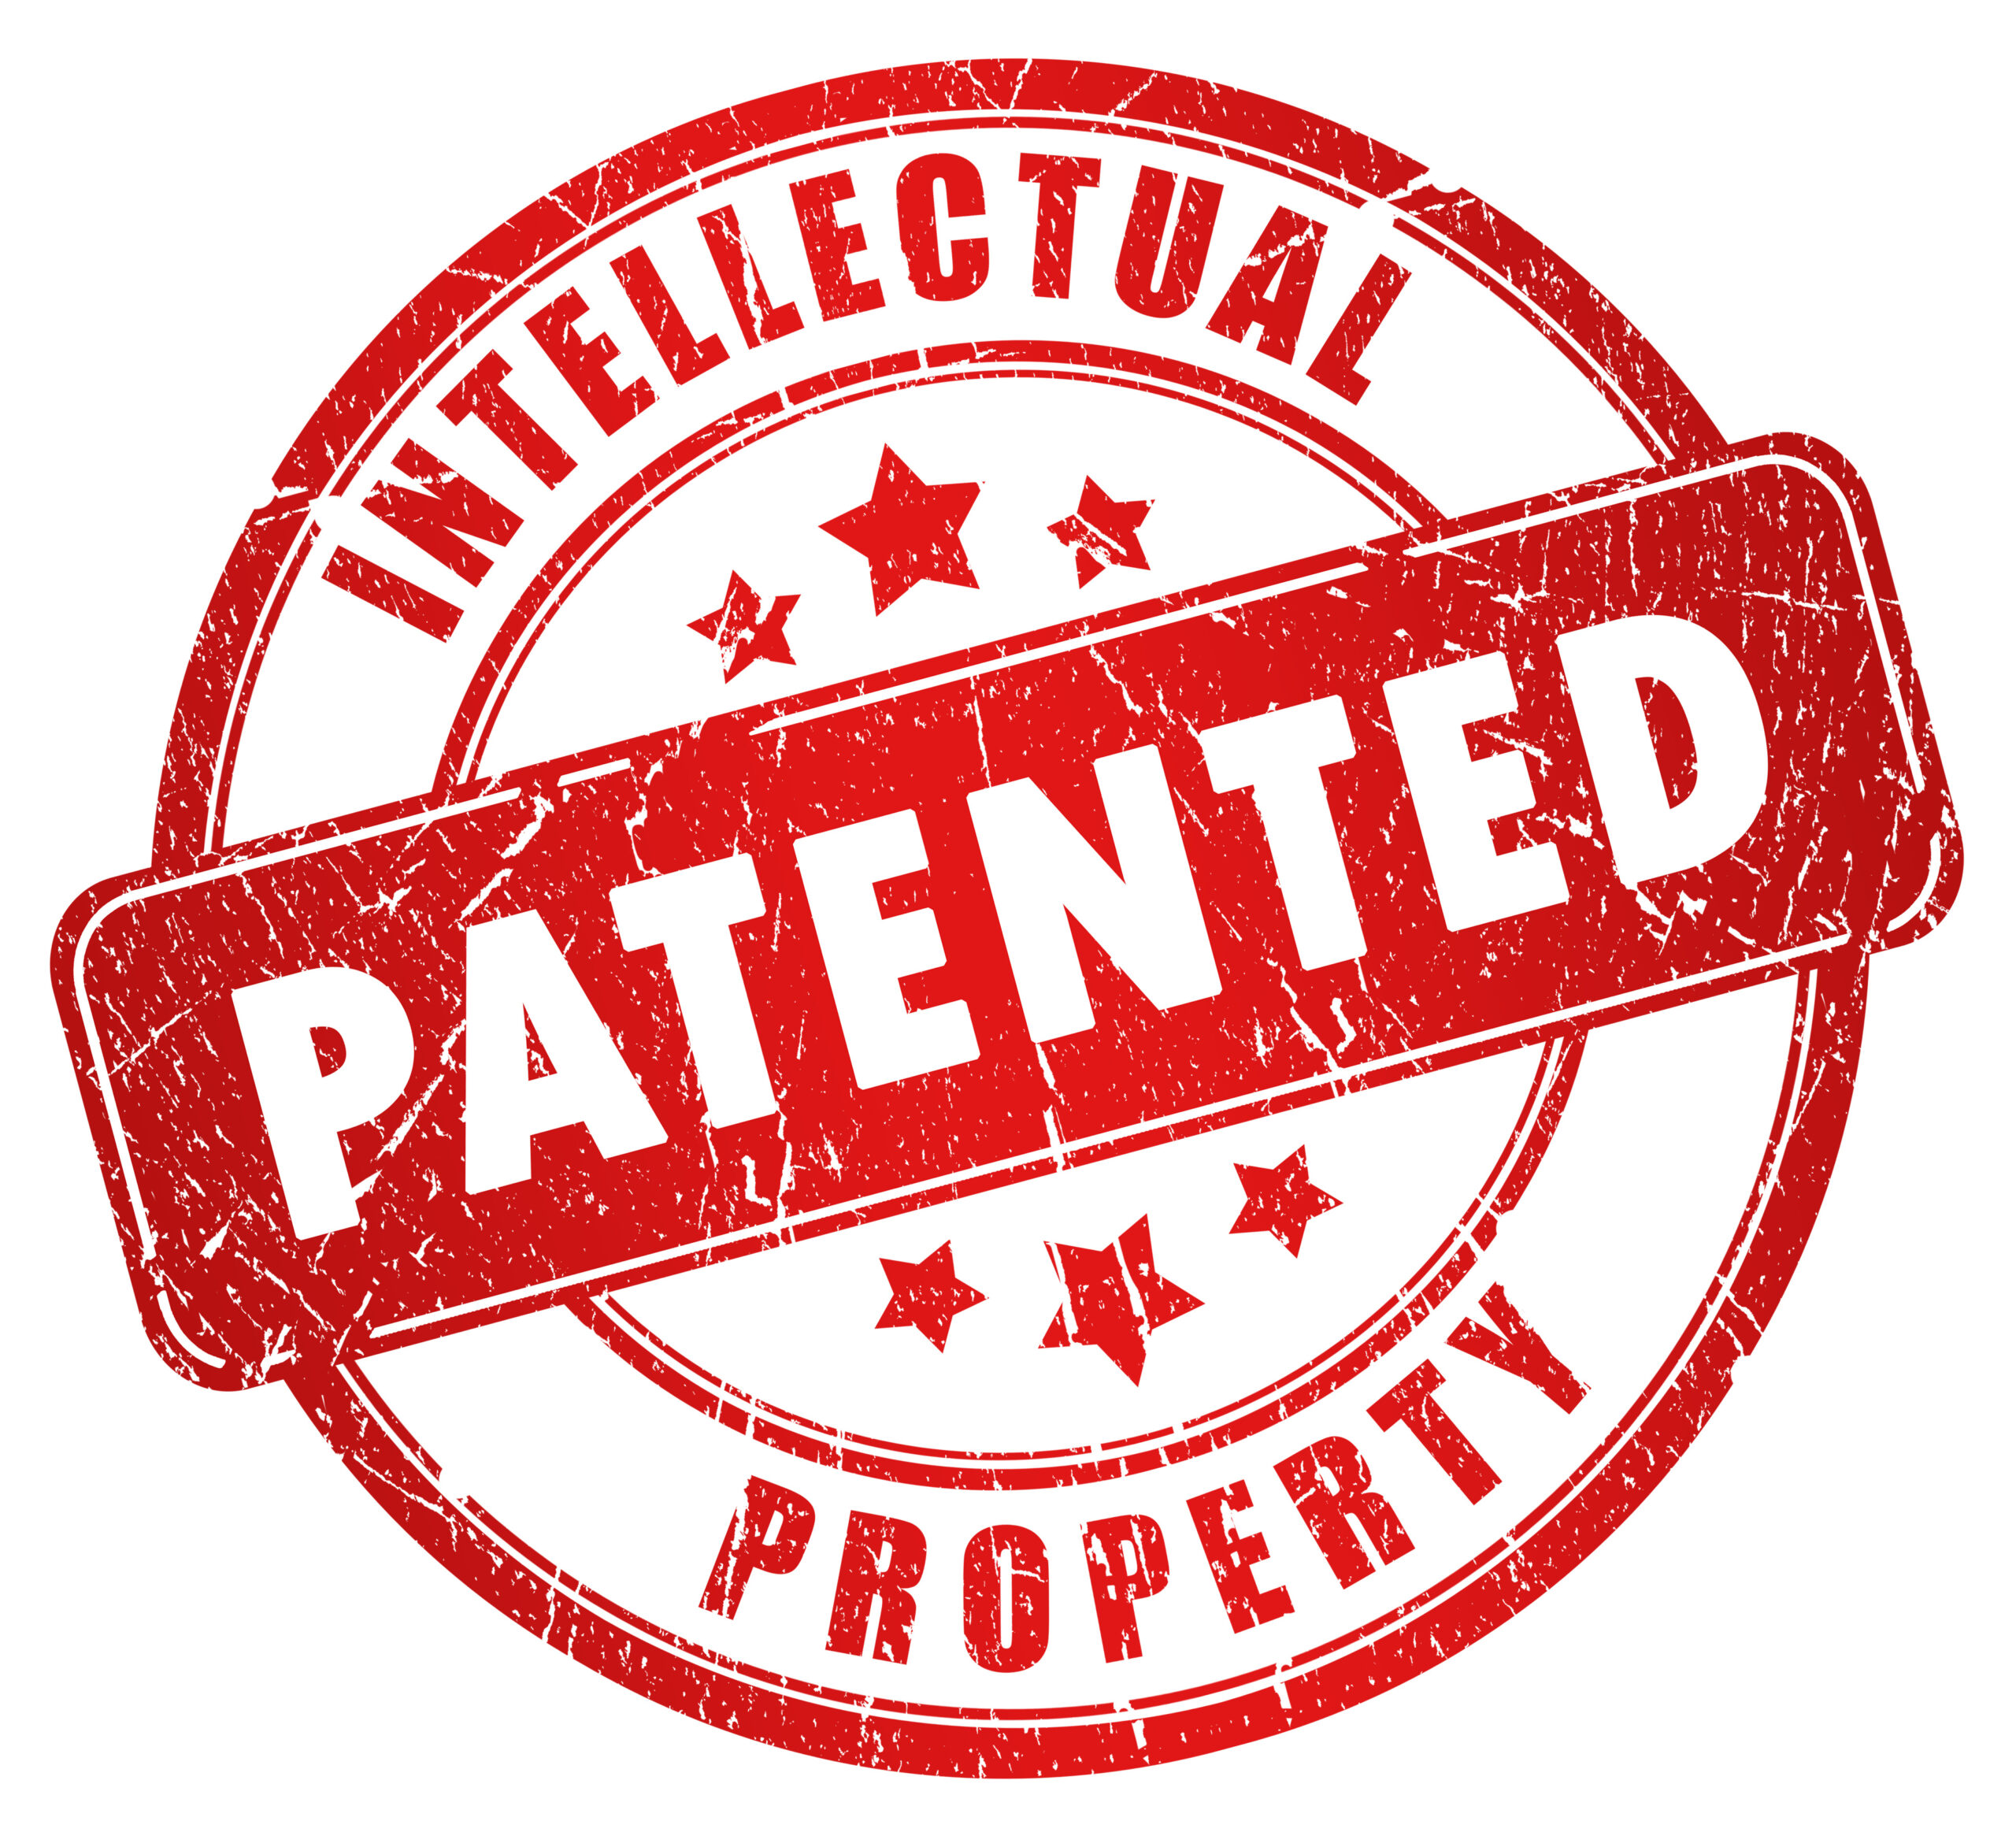 EcoAir's technology is patent protected